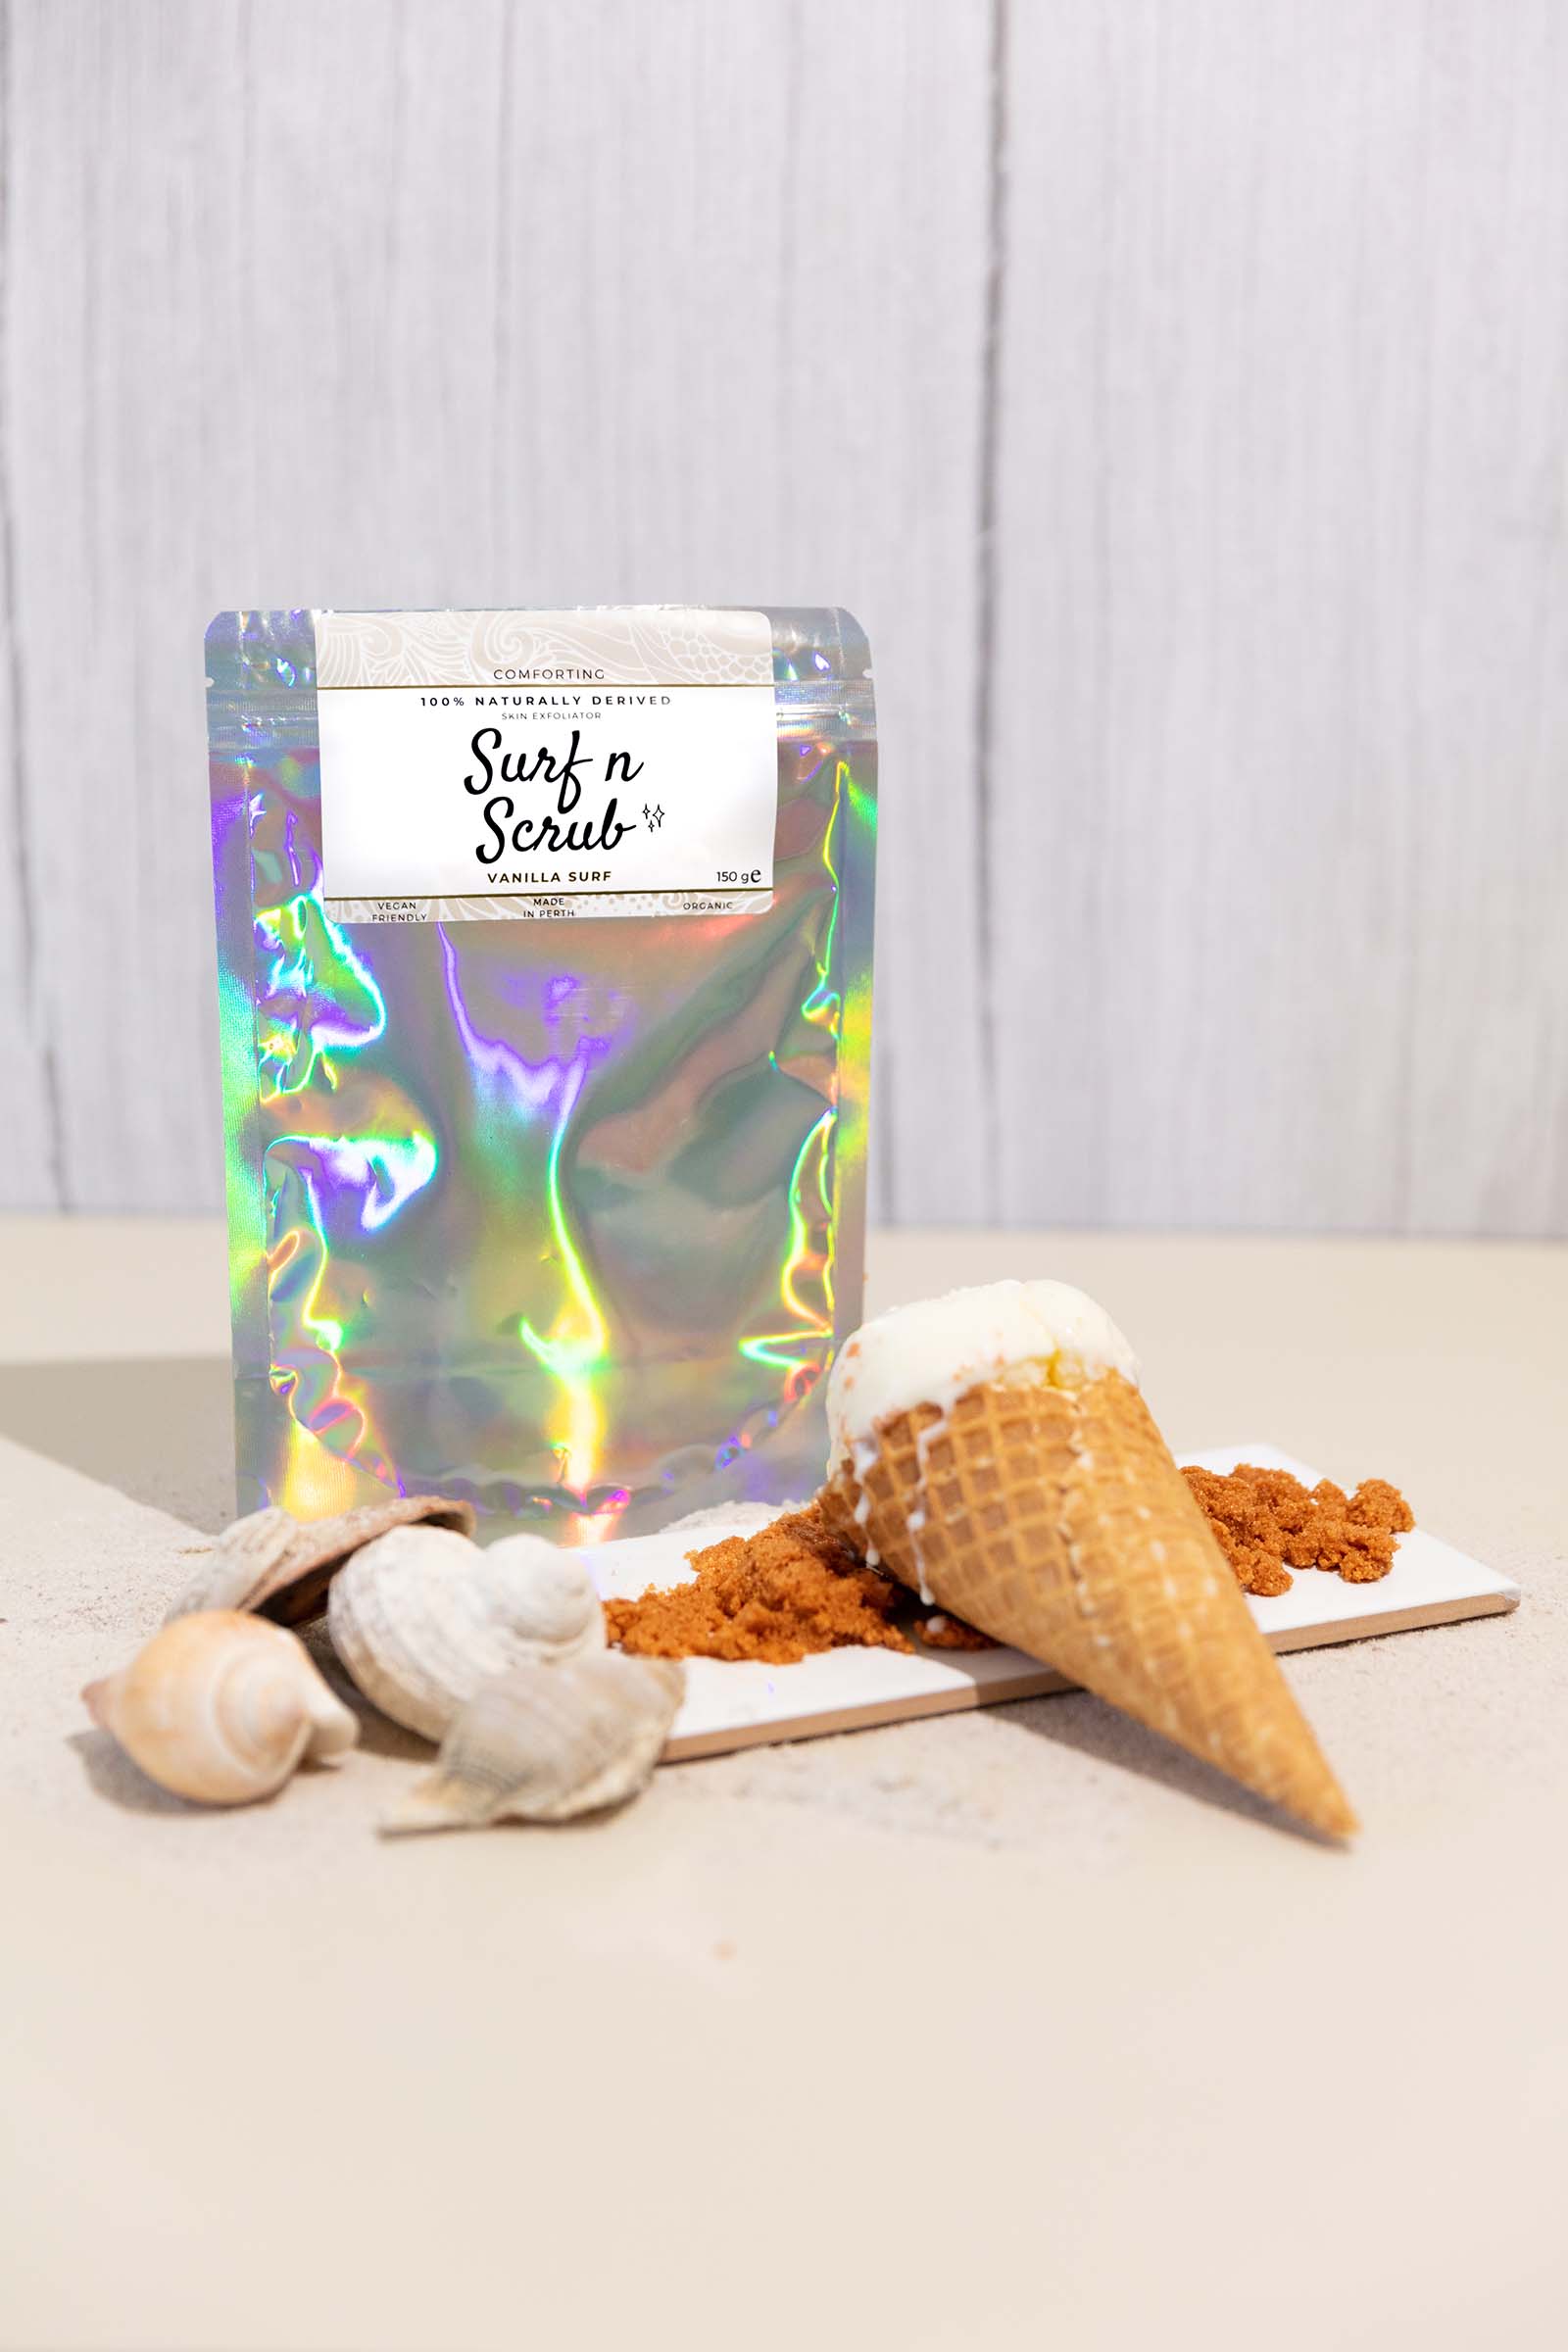 colourful content product photography for surf n scrub. Styled product photography by Megzie Makes 